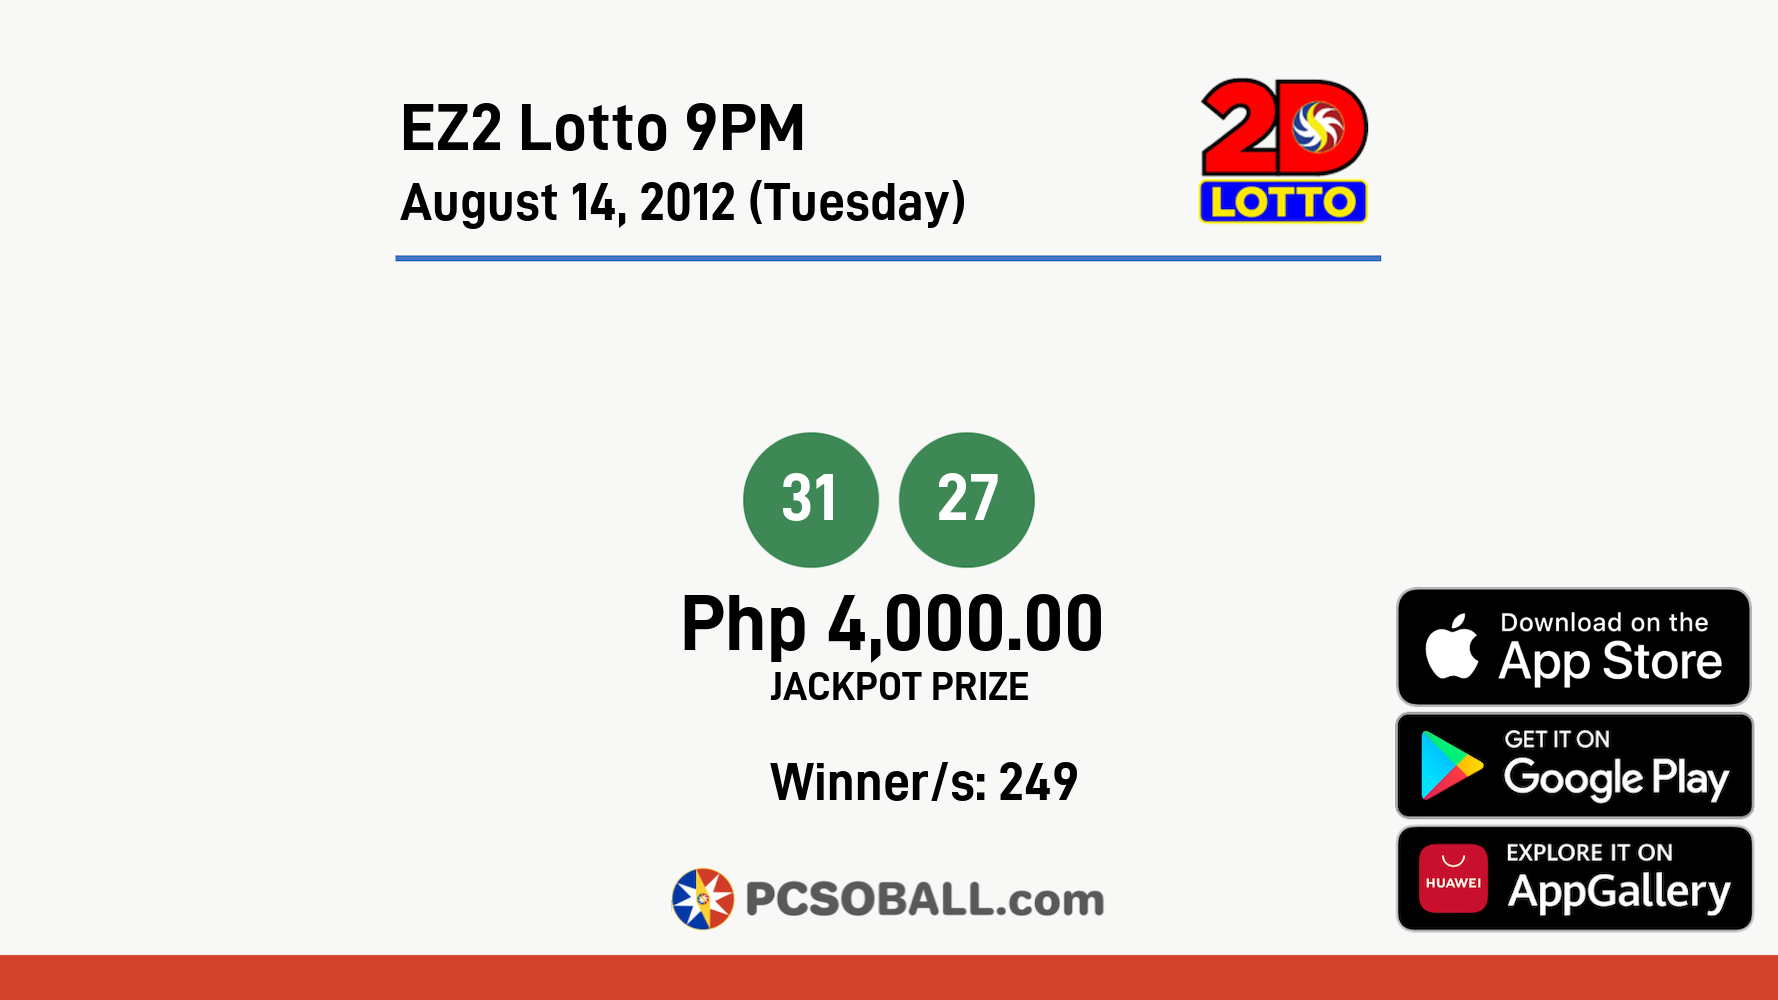 EZ2 Lotto 9PM August 14, 2012 (Tuesday) Result